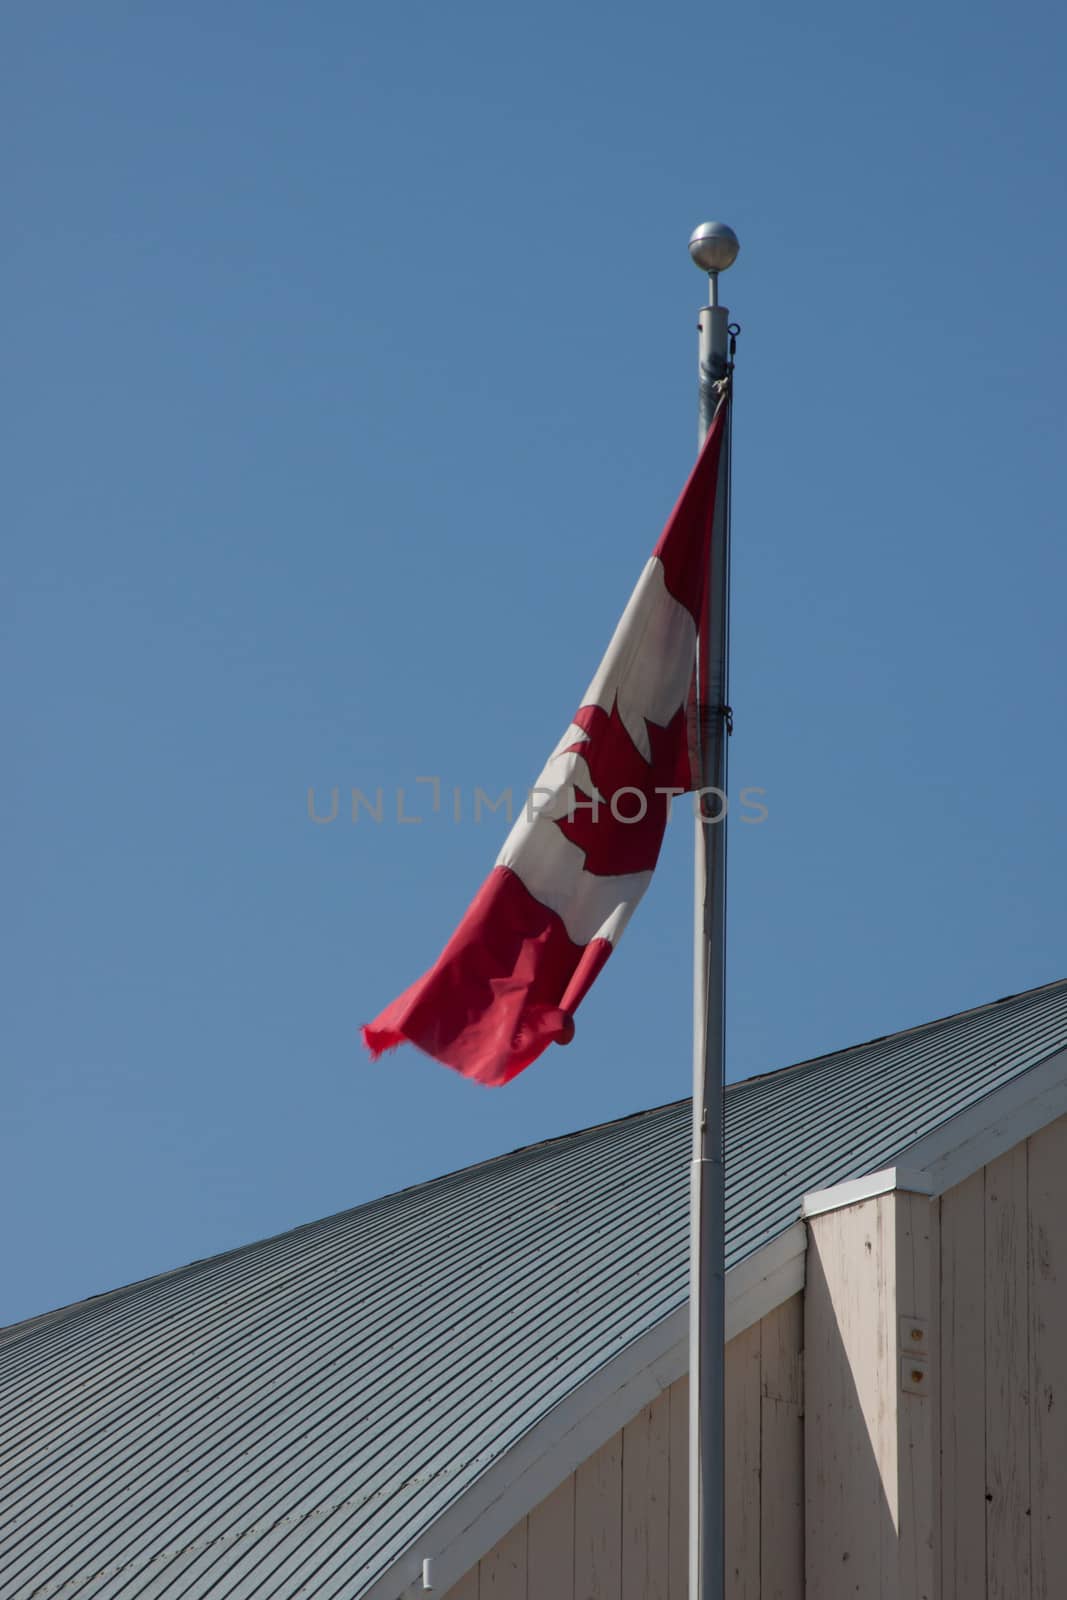 A Canadian flag in the breeze against a blue sky.